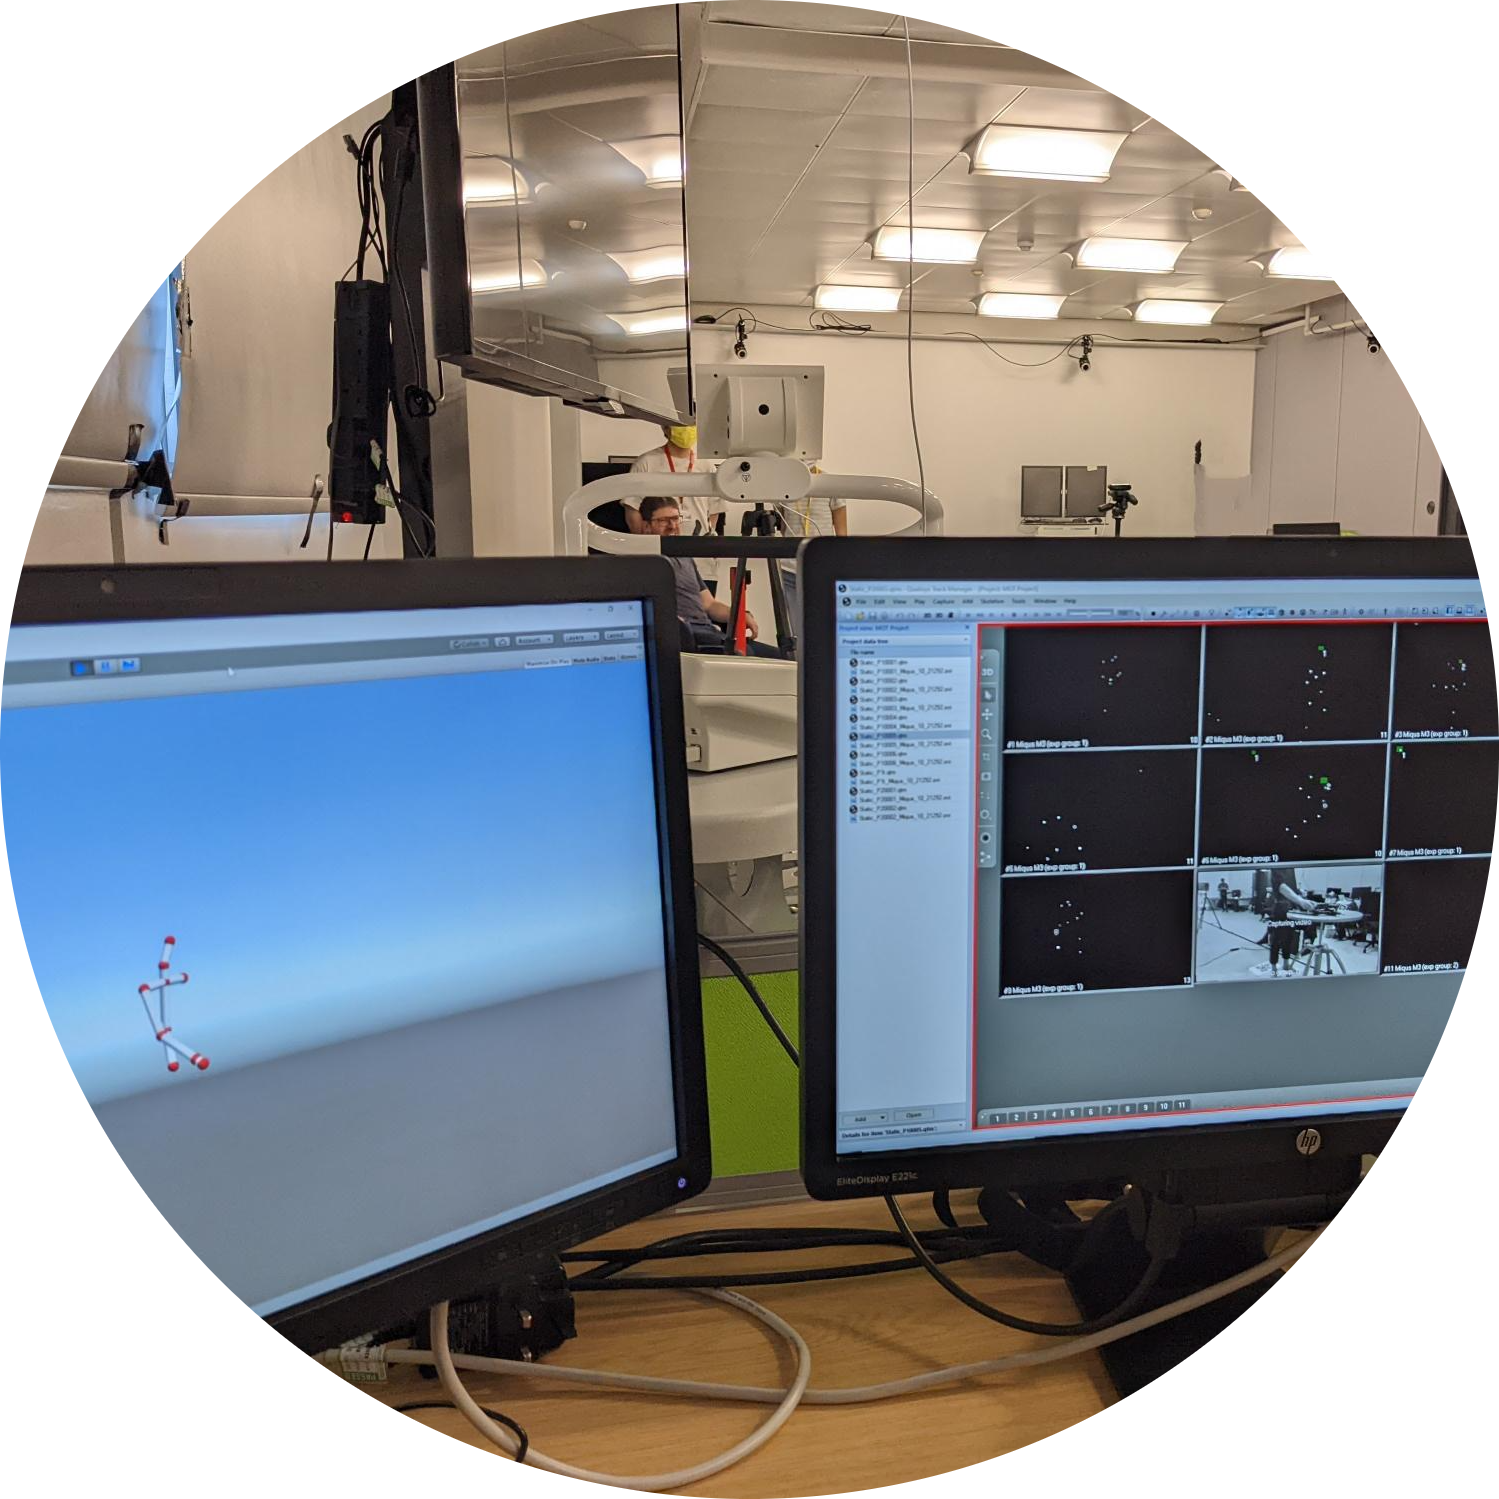 Two computer screens showing images collected when doing motion capture